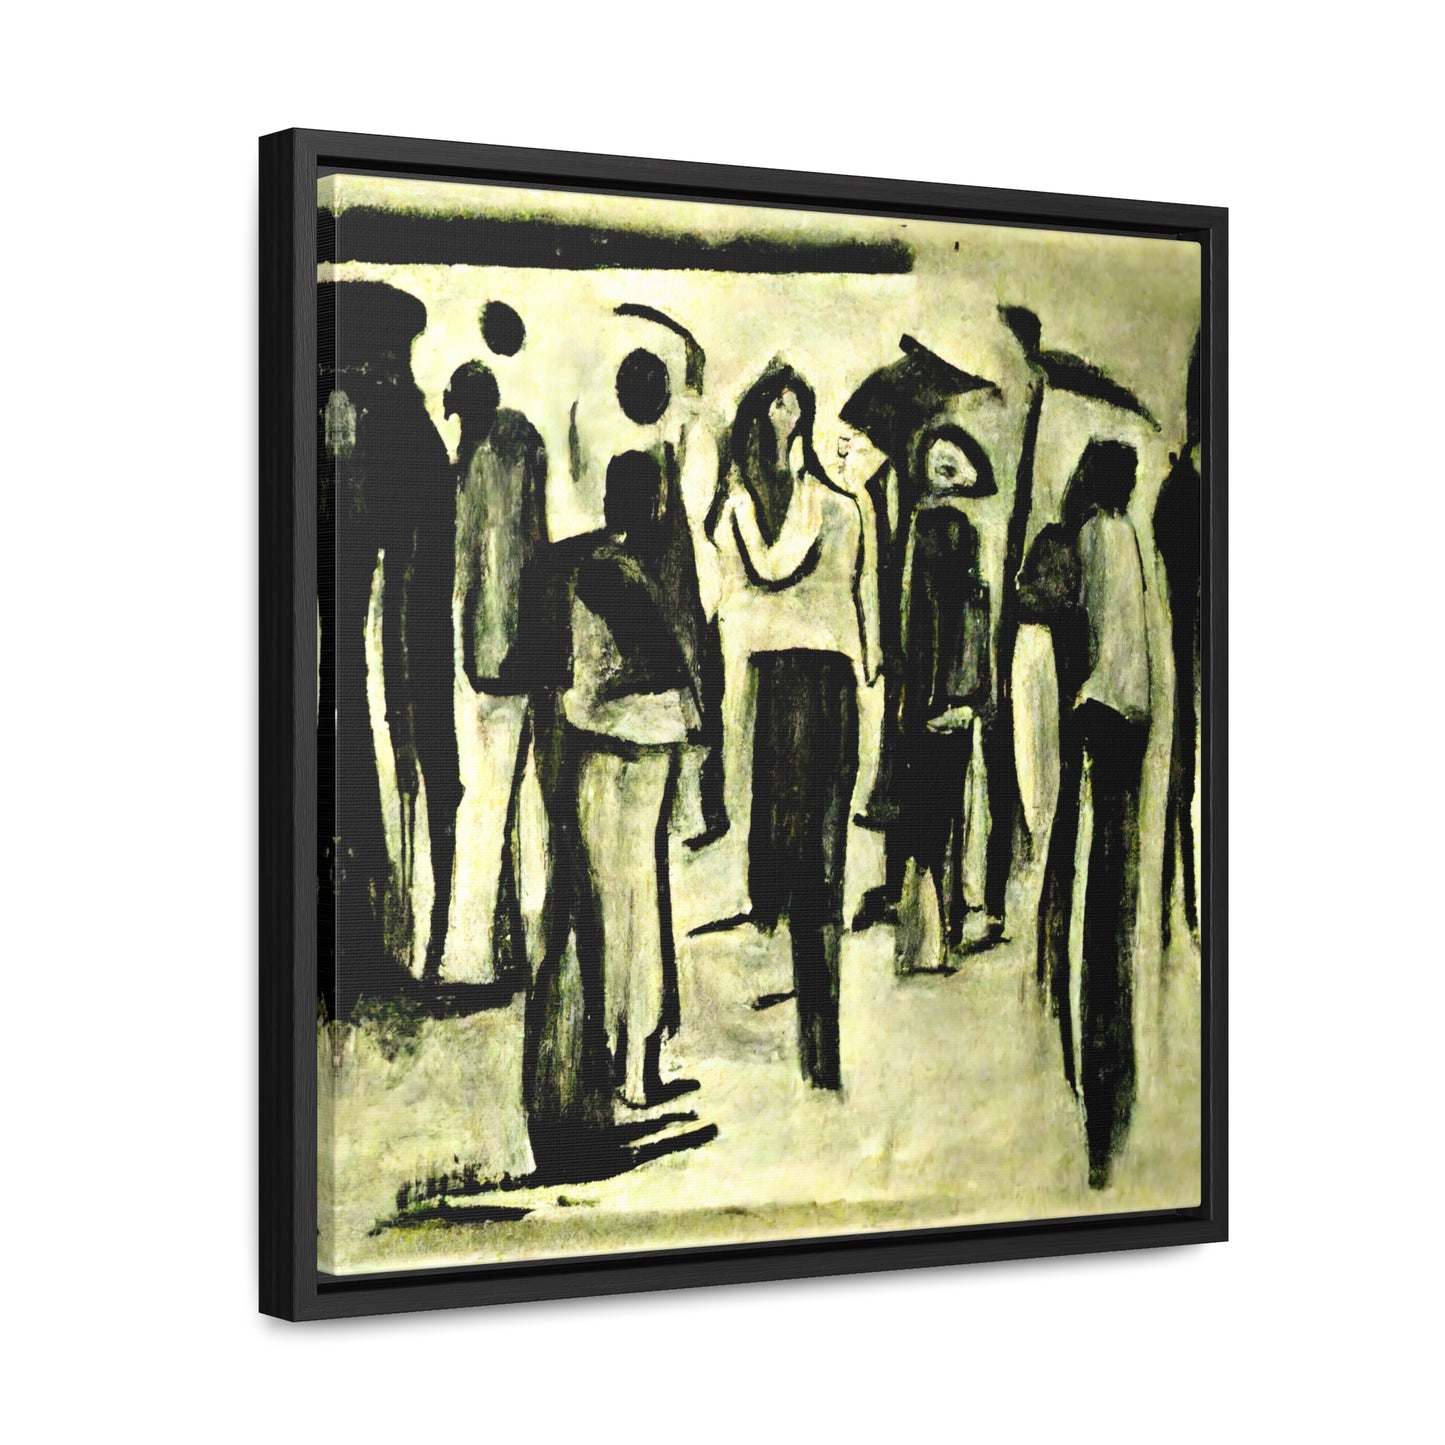 People and Birds 4, Valentinii, Gallery Canvas Wraps, Square Frame